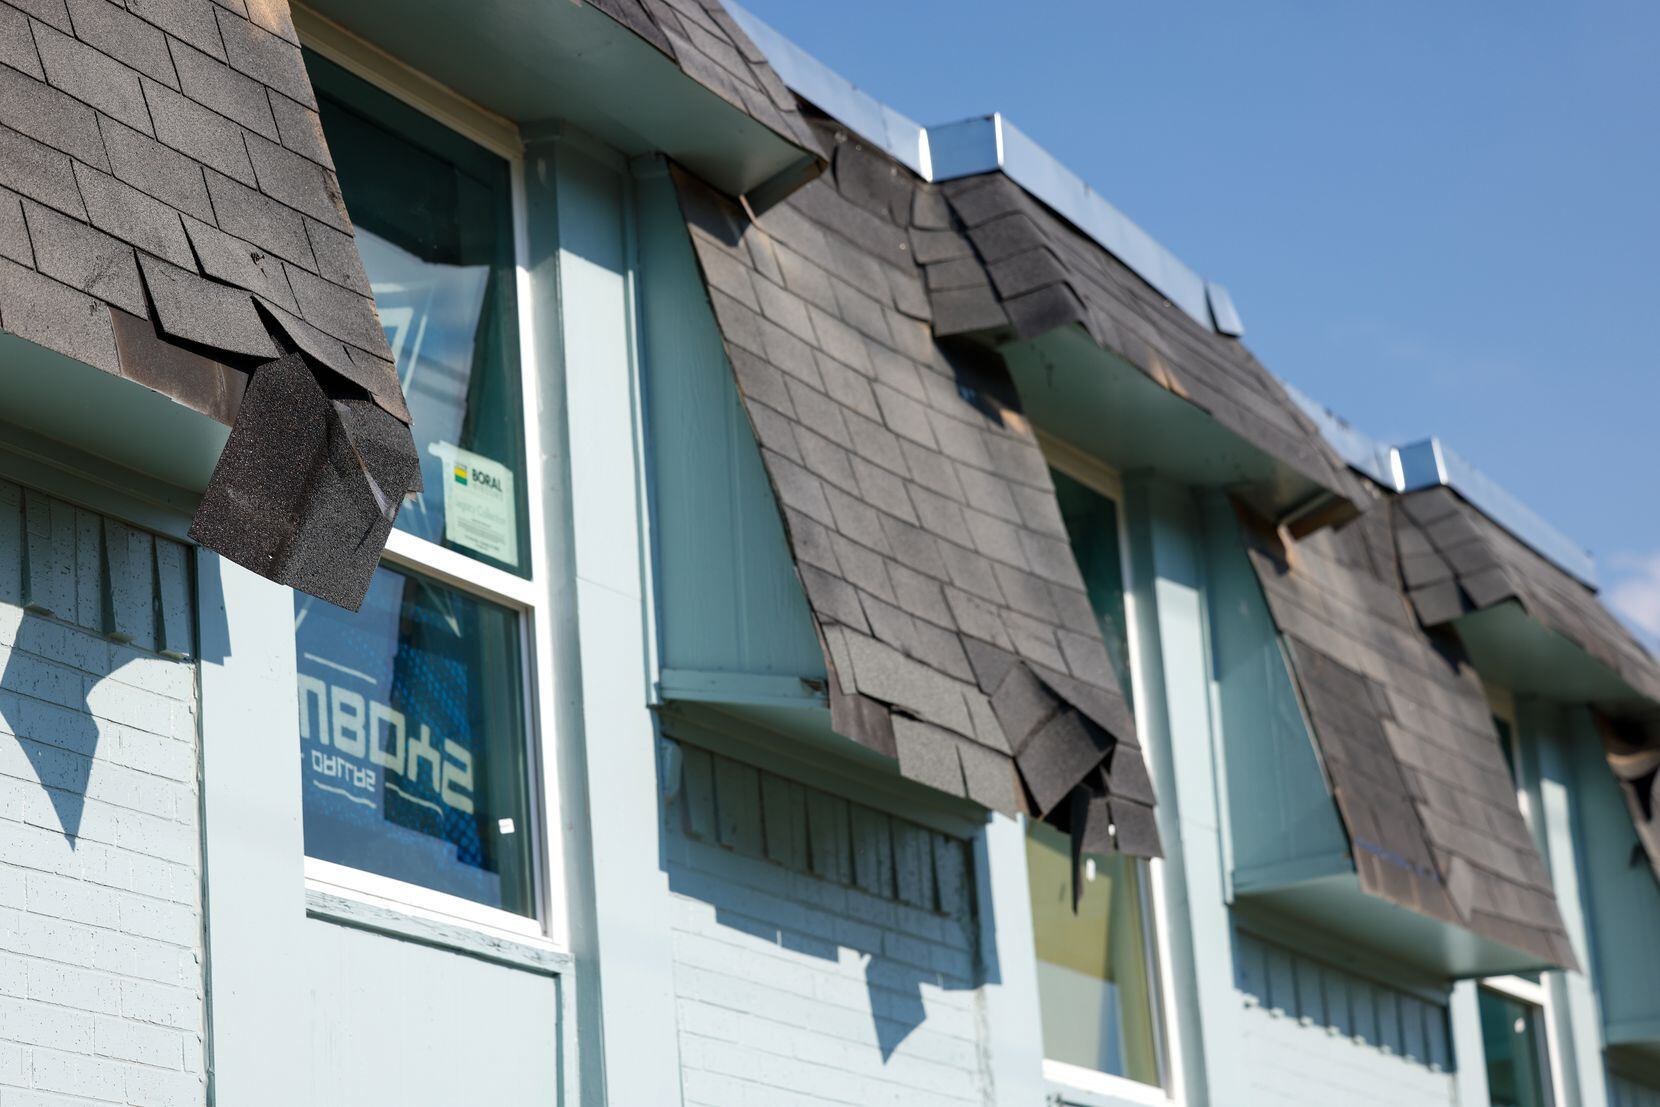 Shingles hang from the roof of Frances Place Apartments, a multi-family complex in Dallas,...